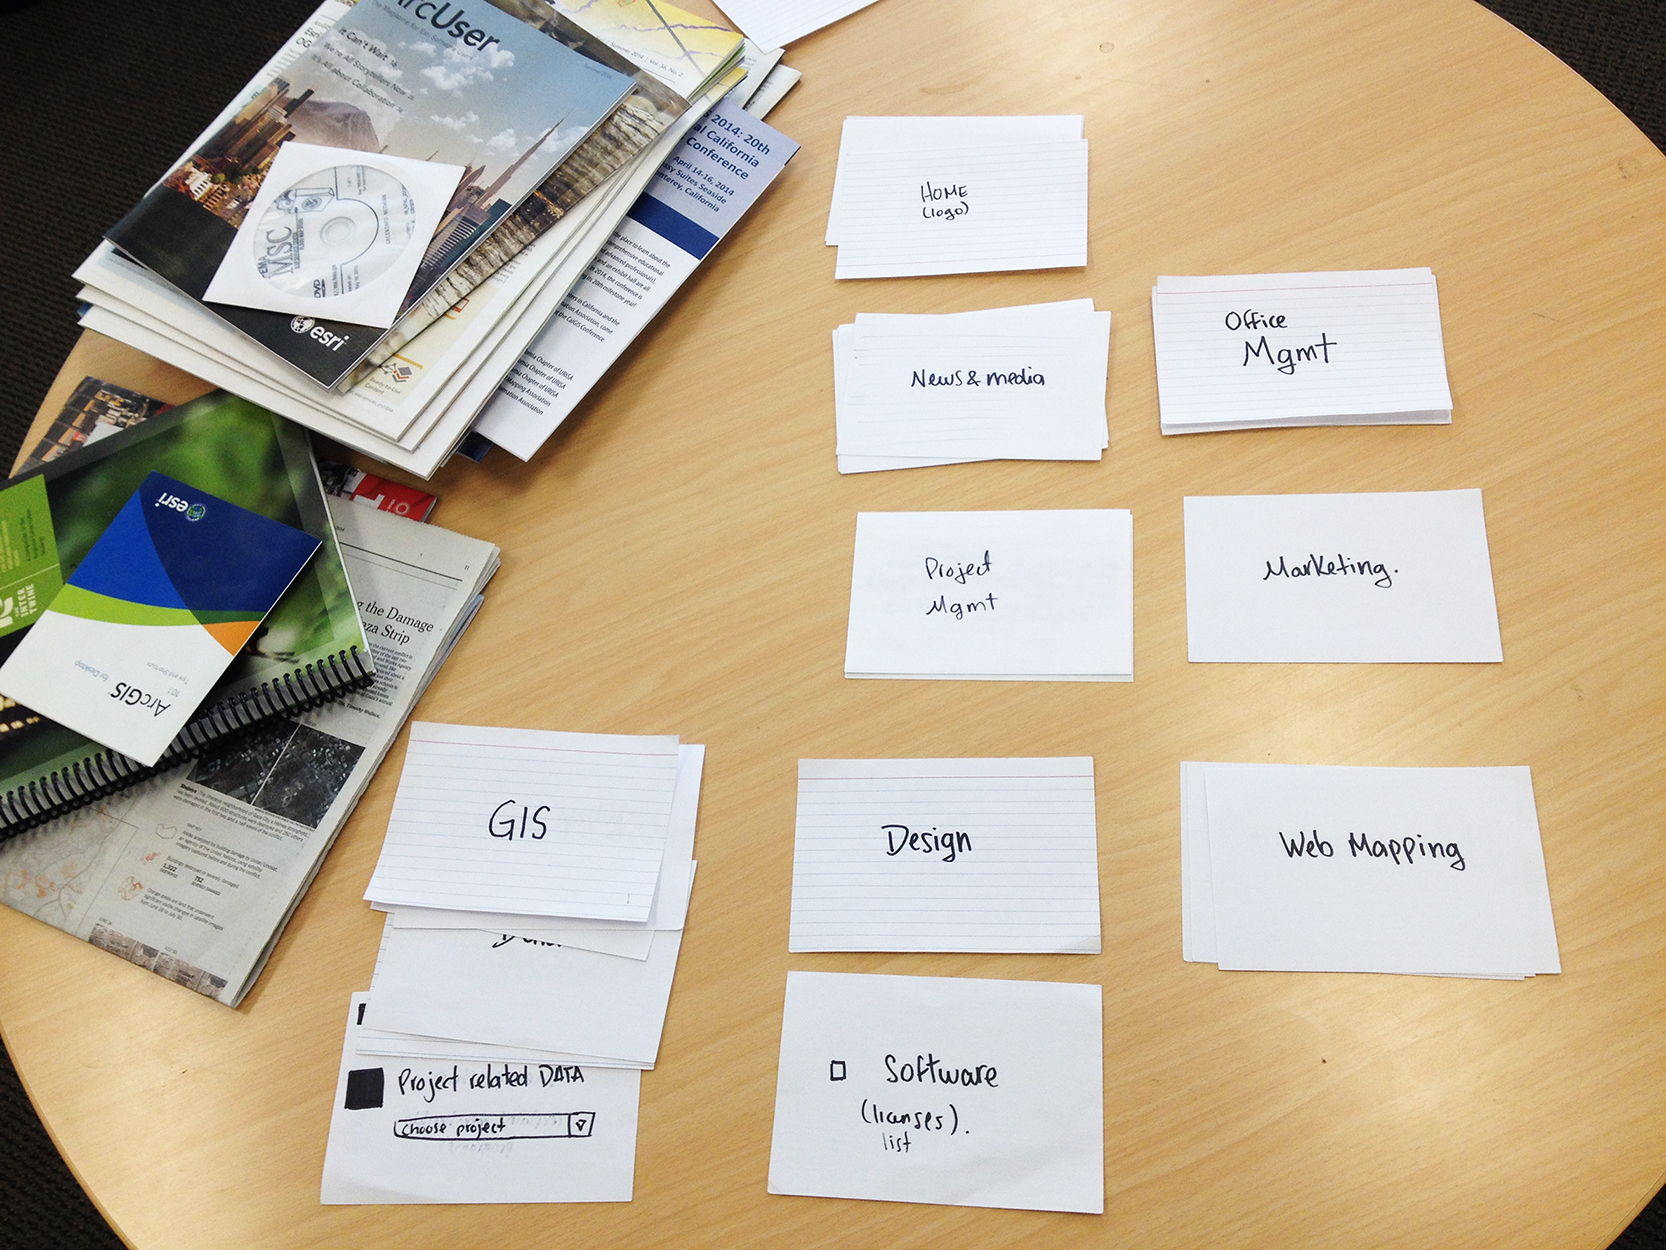 Image of of cards on the table from cards sorting exercise